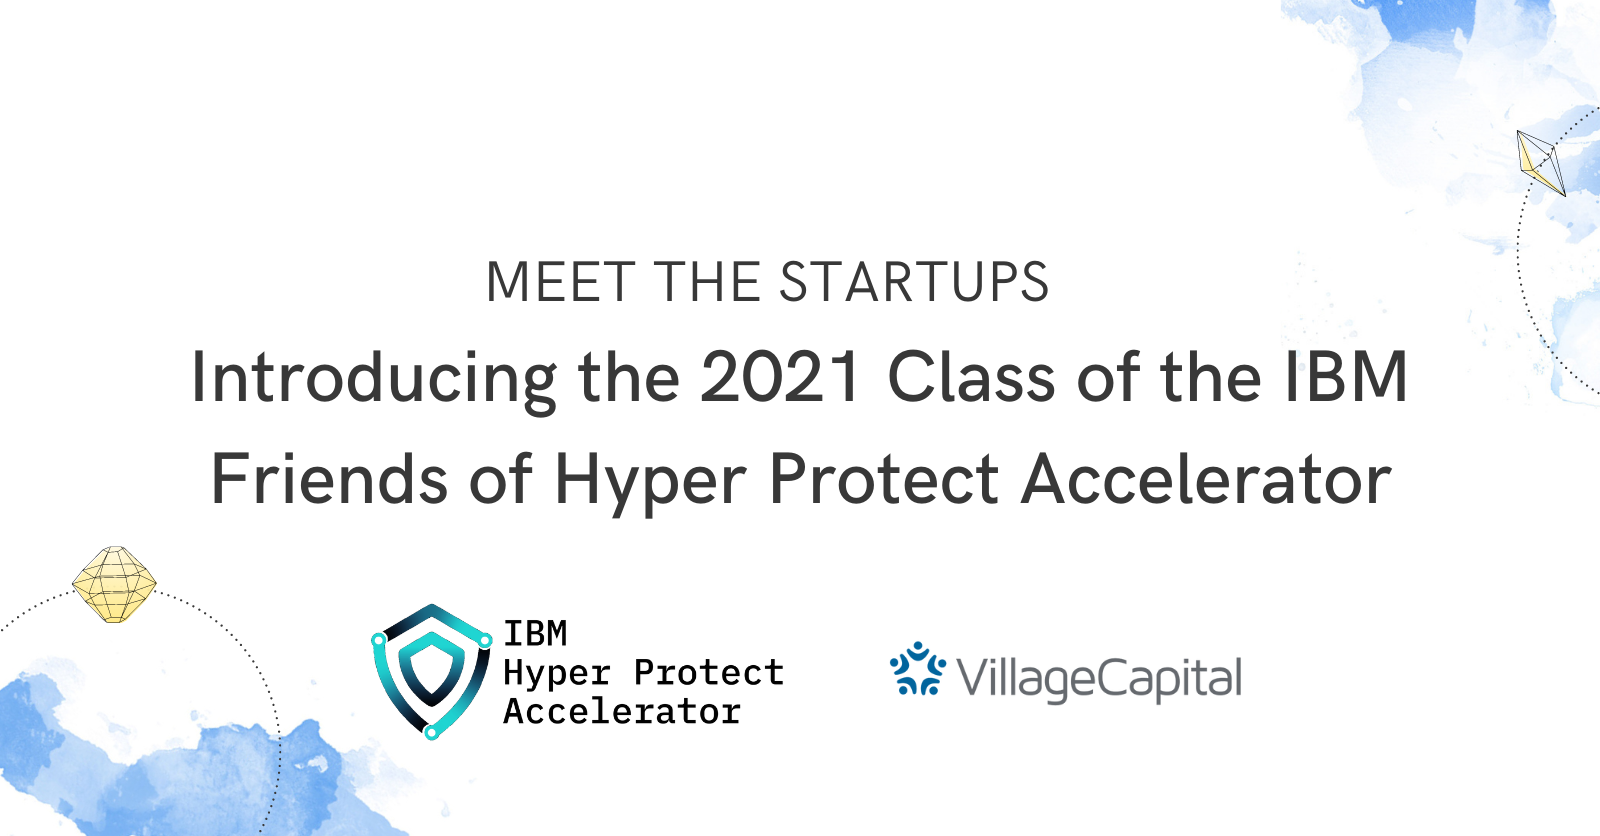 Introducing the 2021 Class of the IBM Friends of Hyper Protect Accelerator